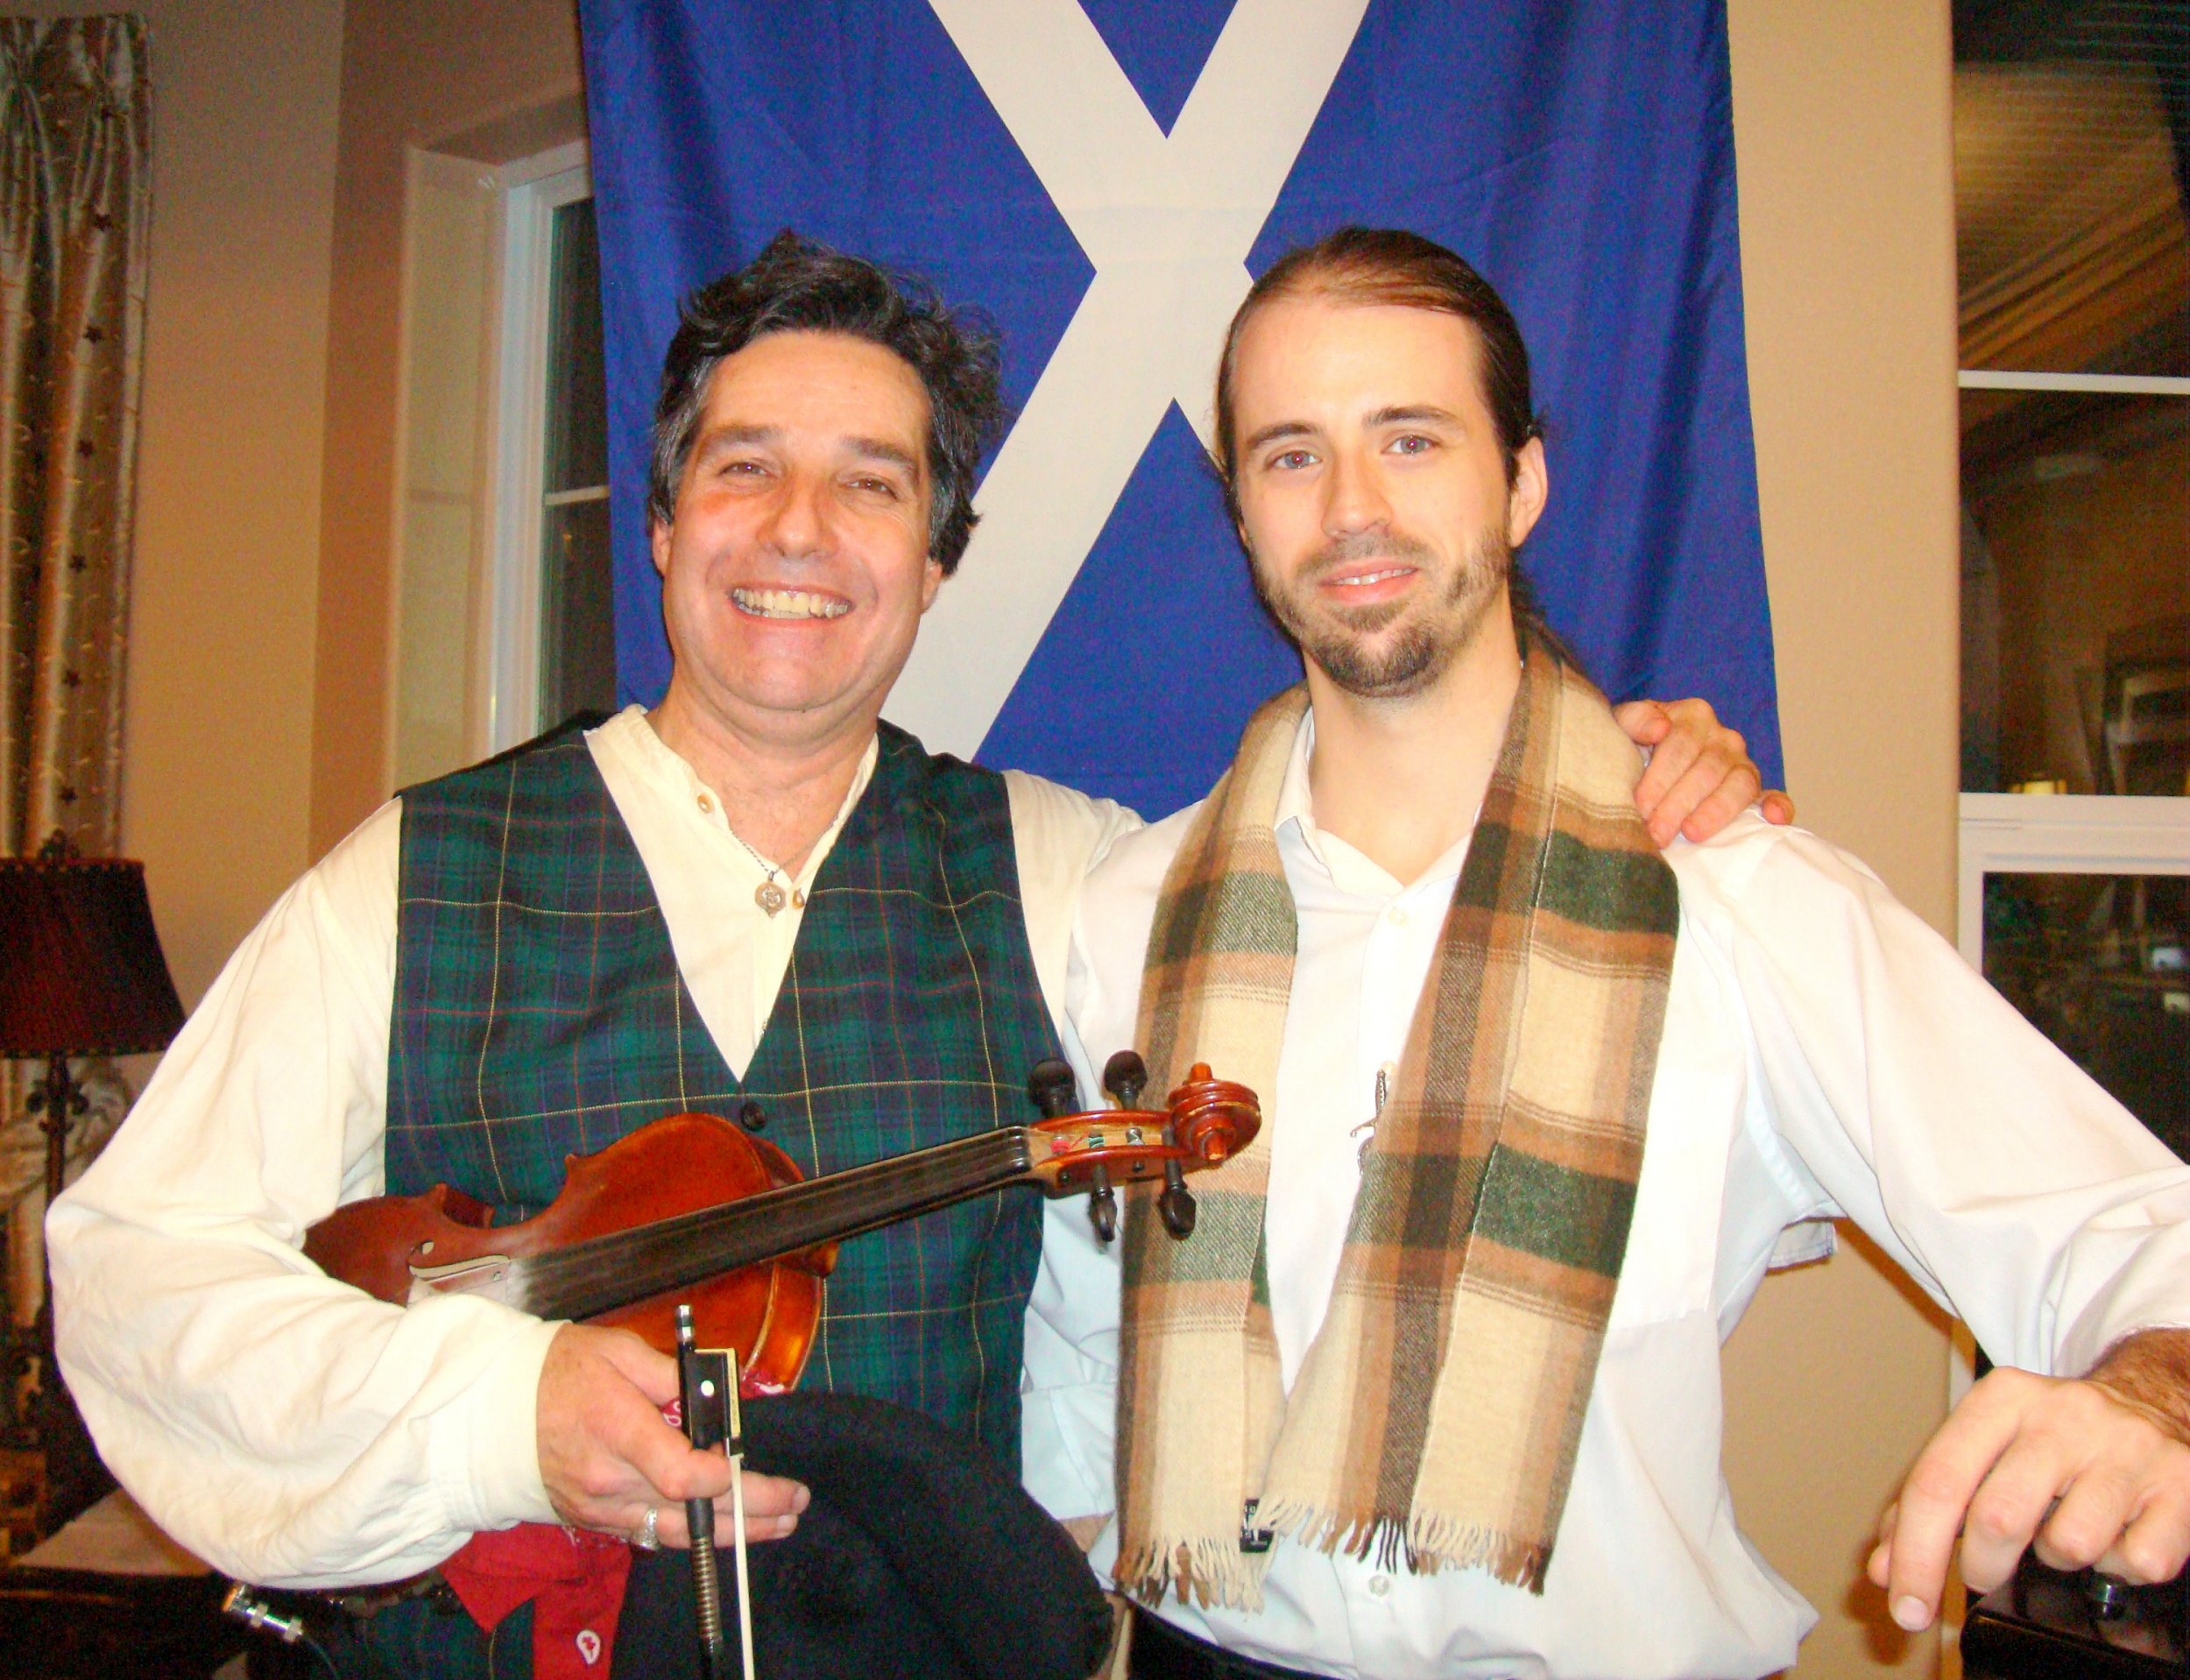 Tom Hamilton (Violinist and Singer) and Derek Giberson (Pianist) fantastic entertainers